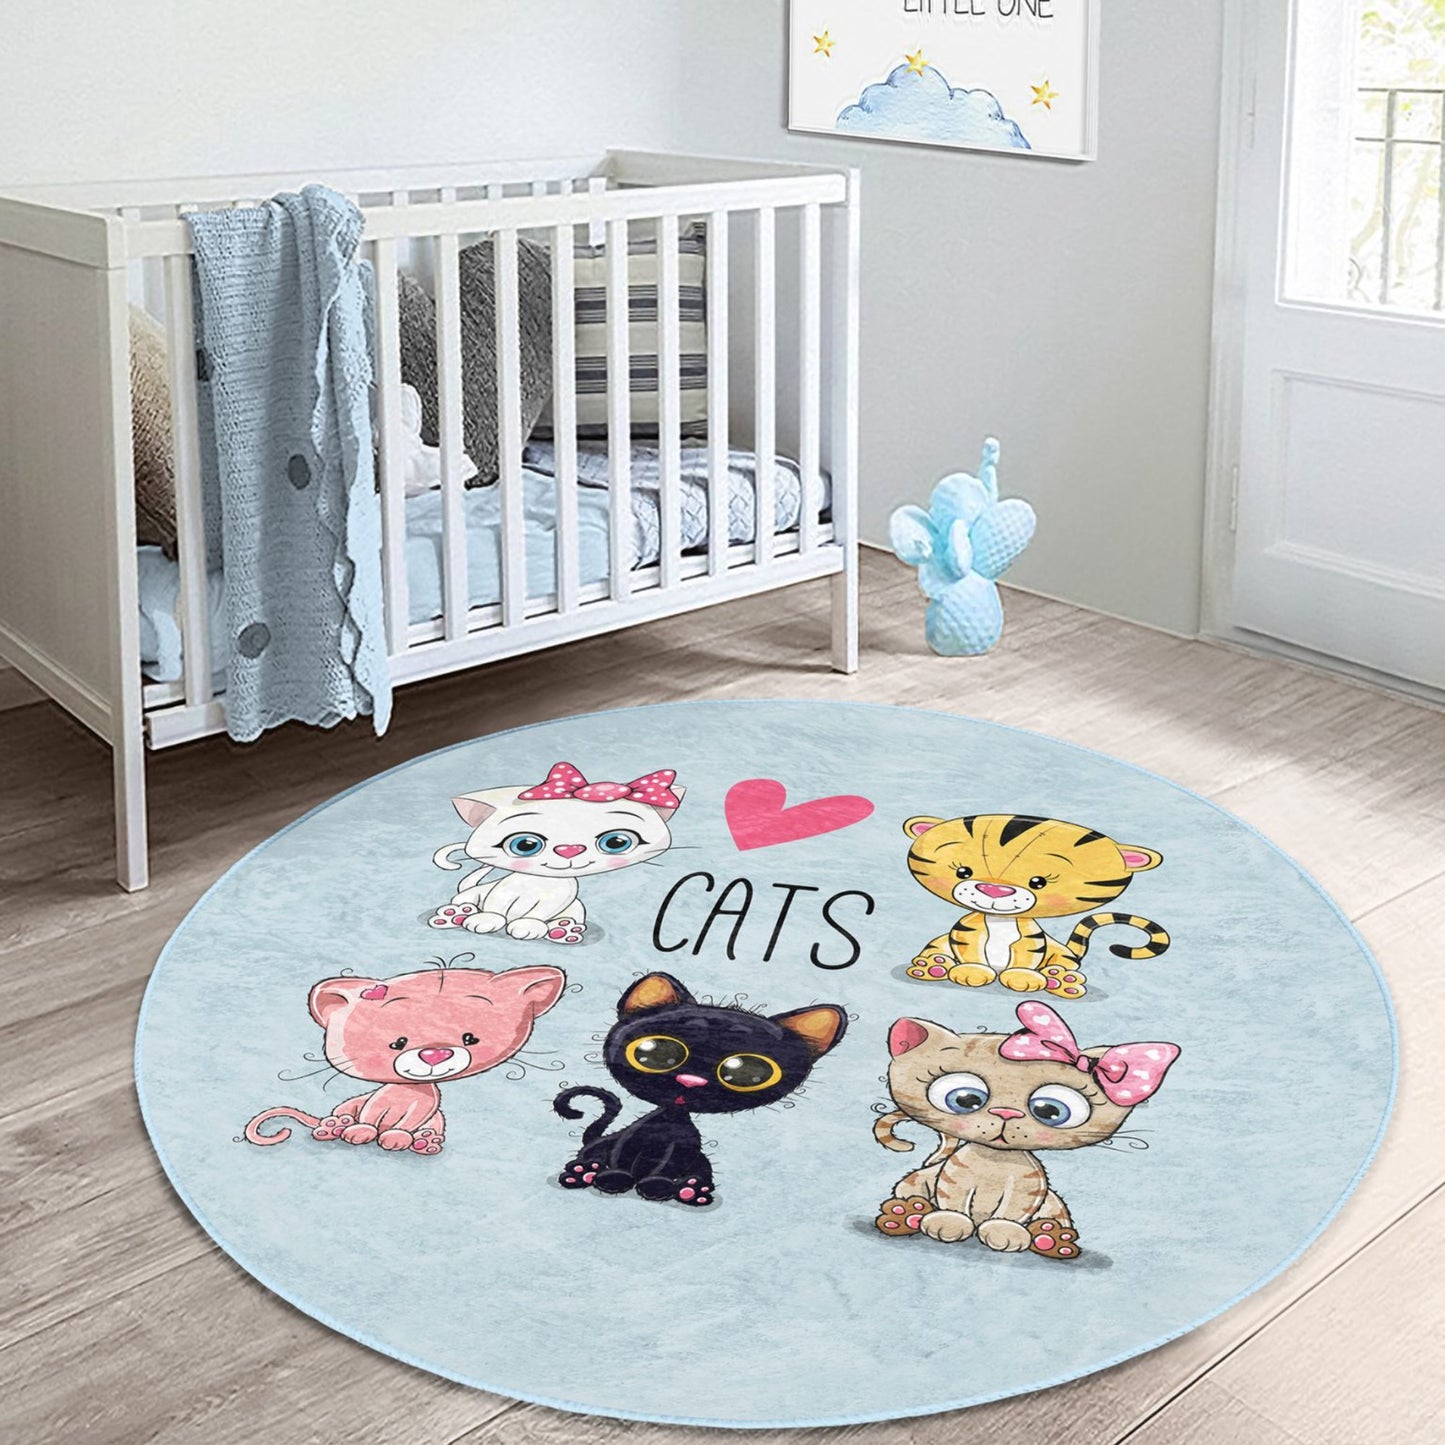 Round Kitty Patterned Floor Rug - Adorable Charm